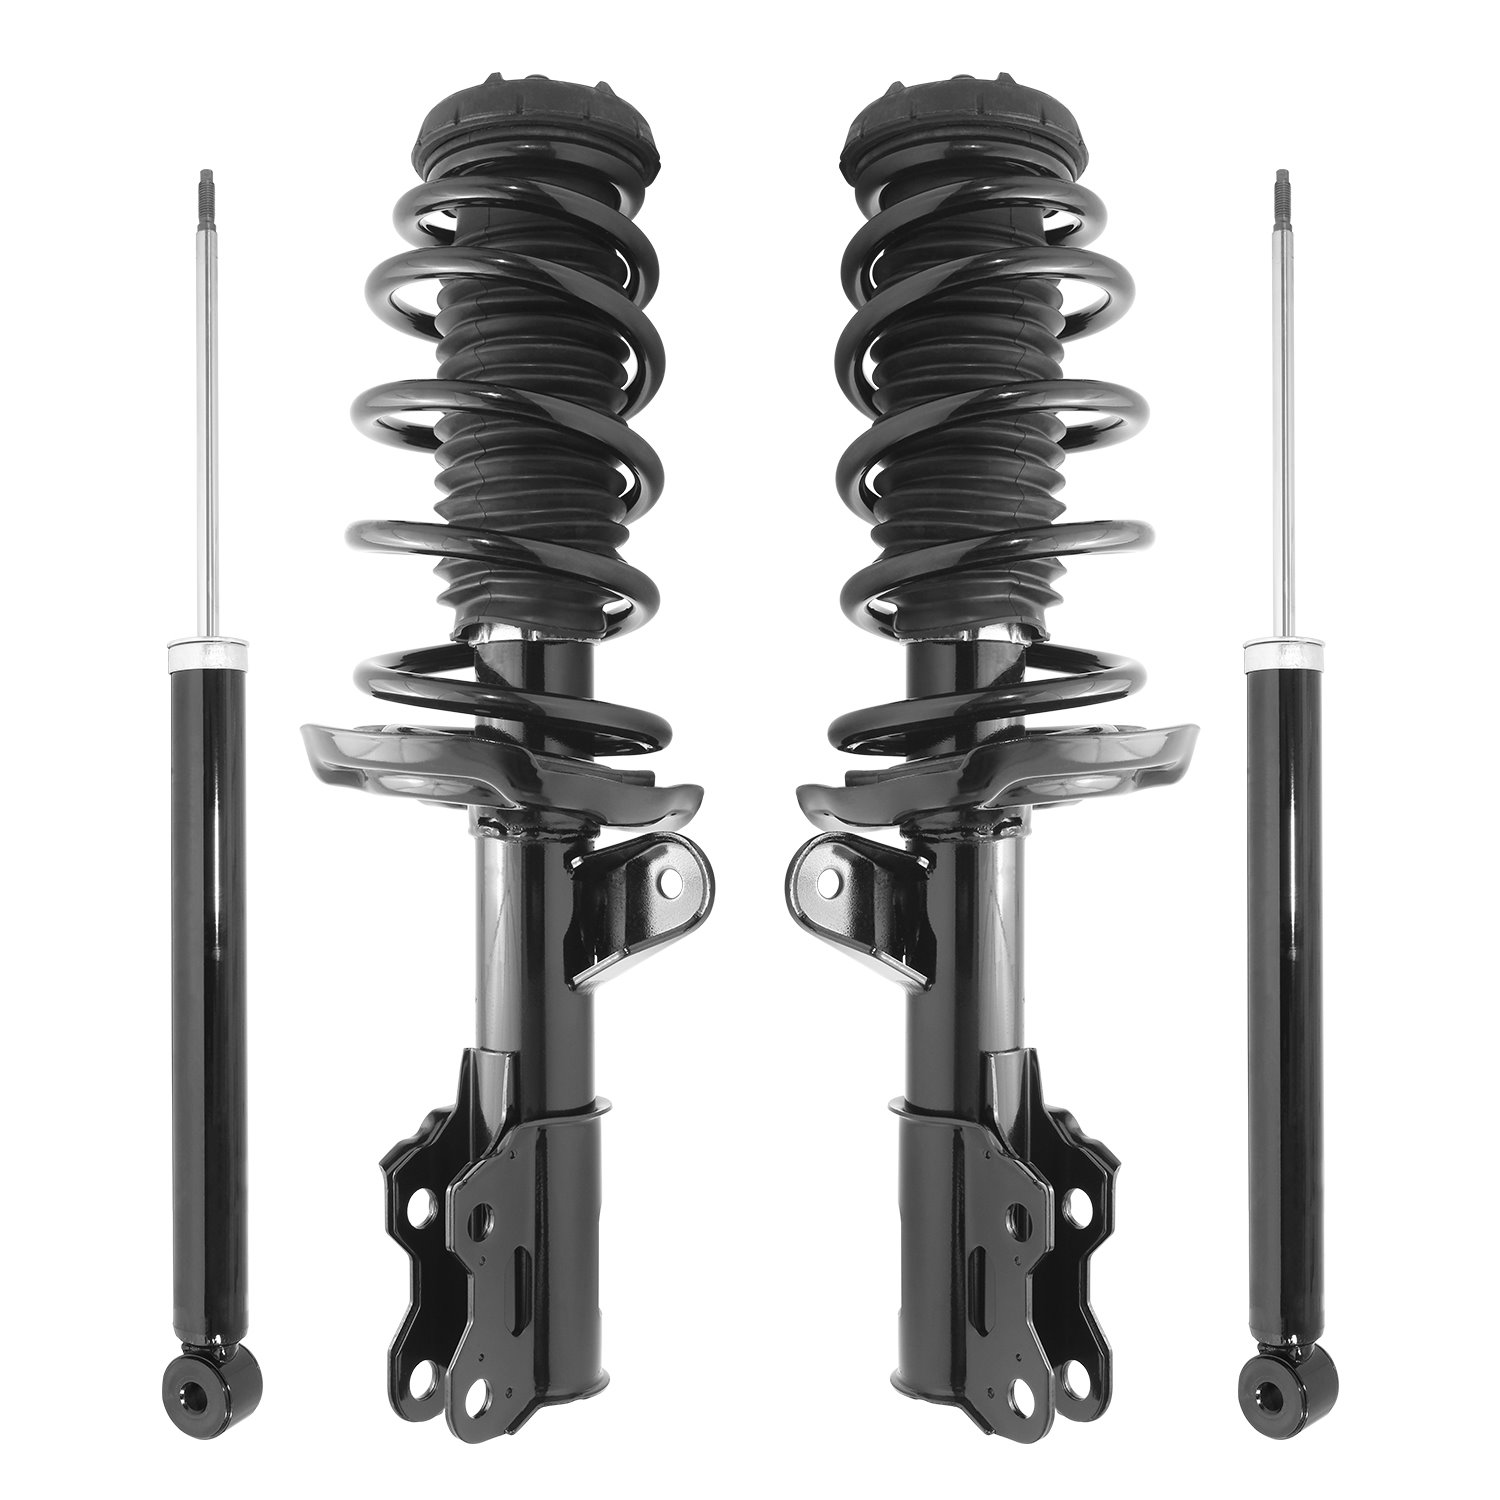 4-11715-251170-001 Front & Rear Suspension Strut & Coil Spring Assembly Fits Select Buick Encore, Chevy Trax